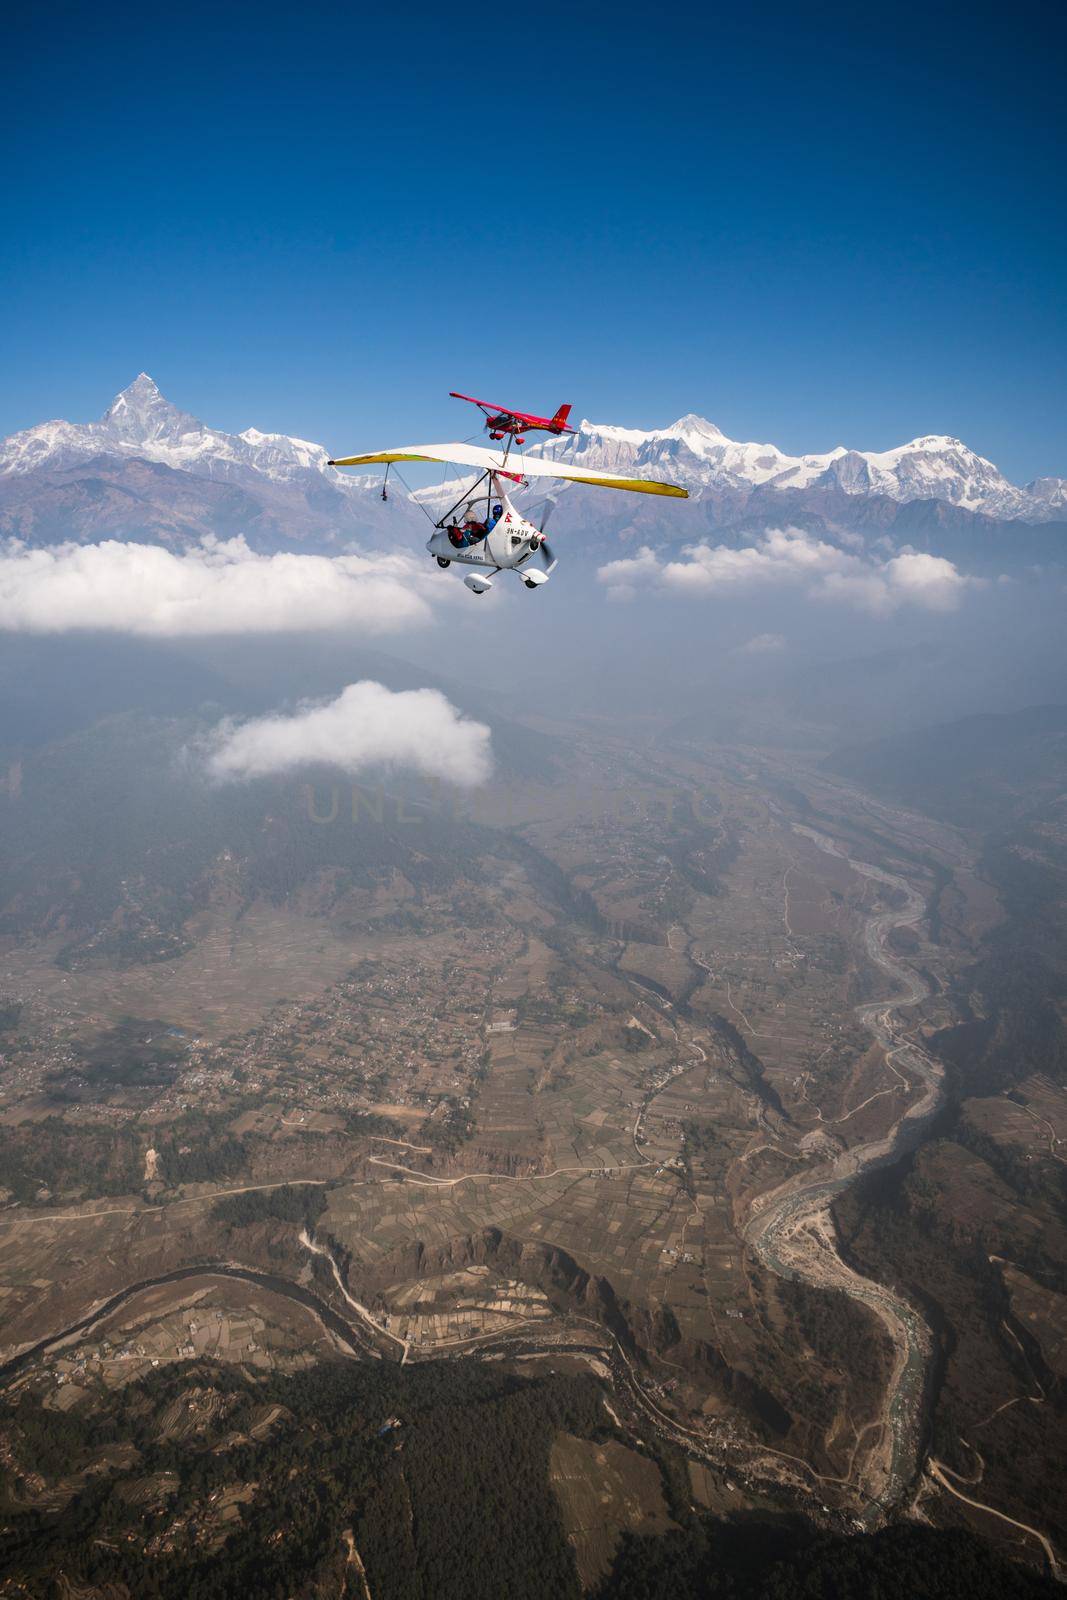 Ultralight trike and plane fly over Pokhara and Annapurna region by Arsgera